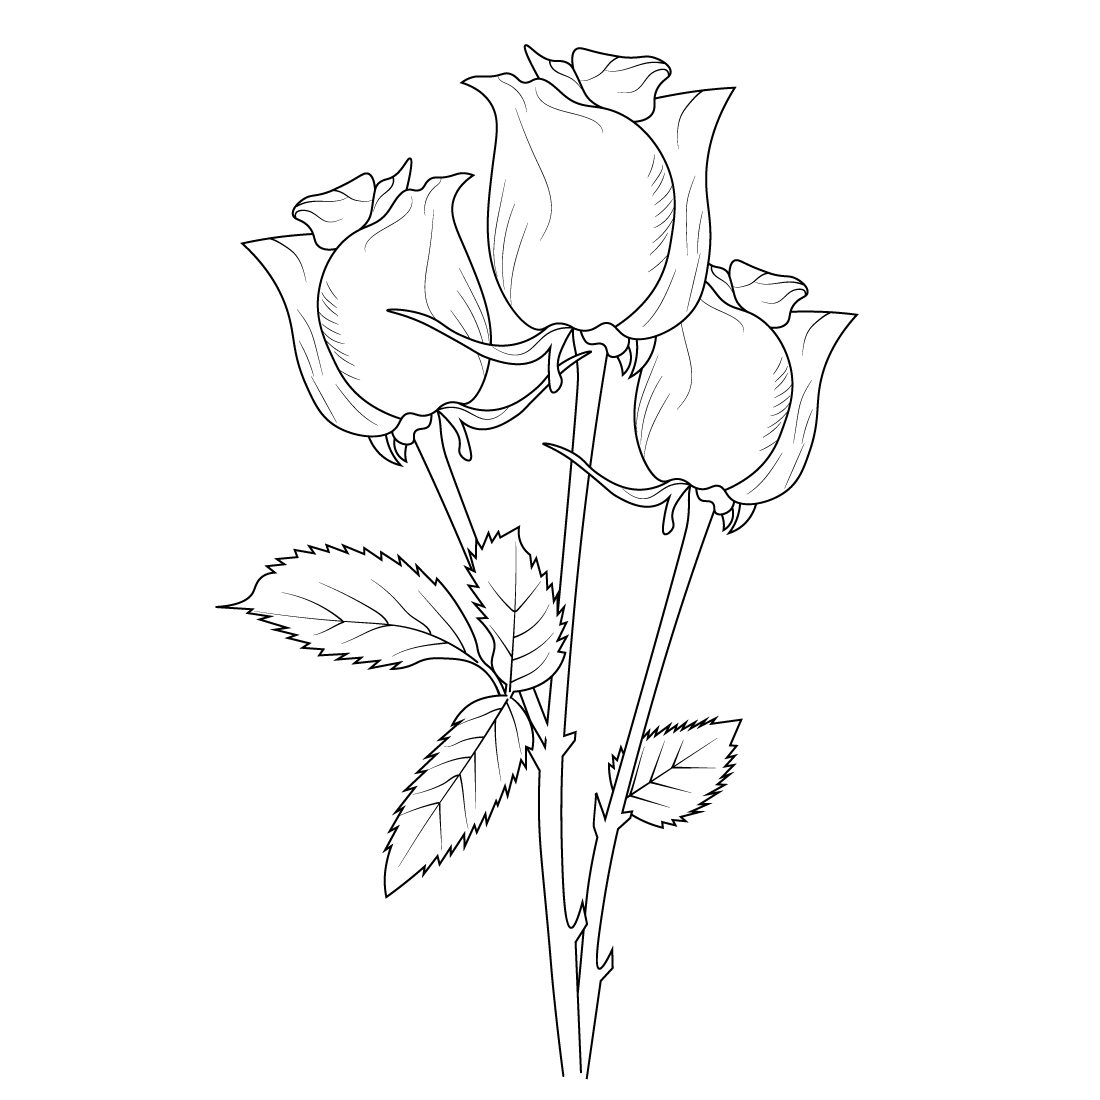 rose flower drawing is easy for kids, pencil how to draw a rose ...